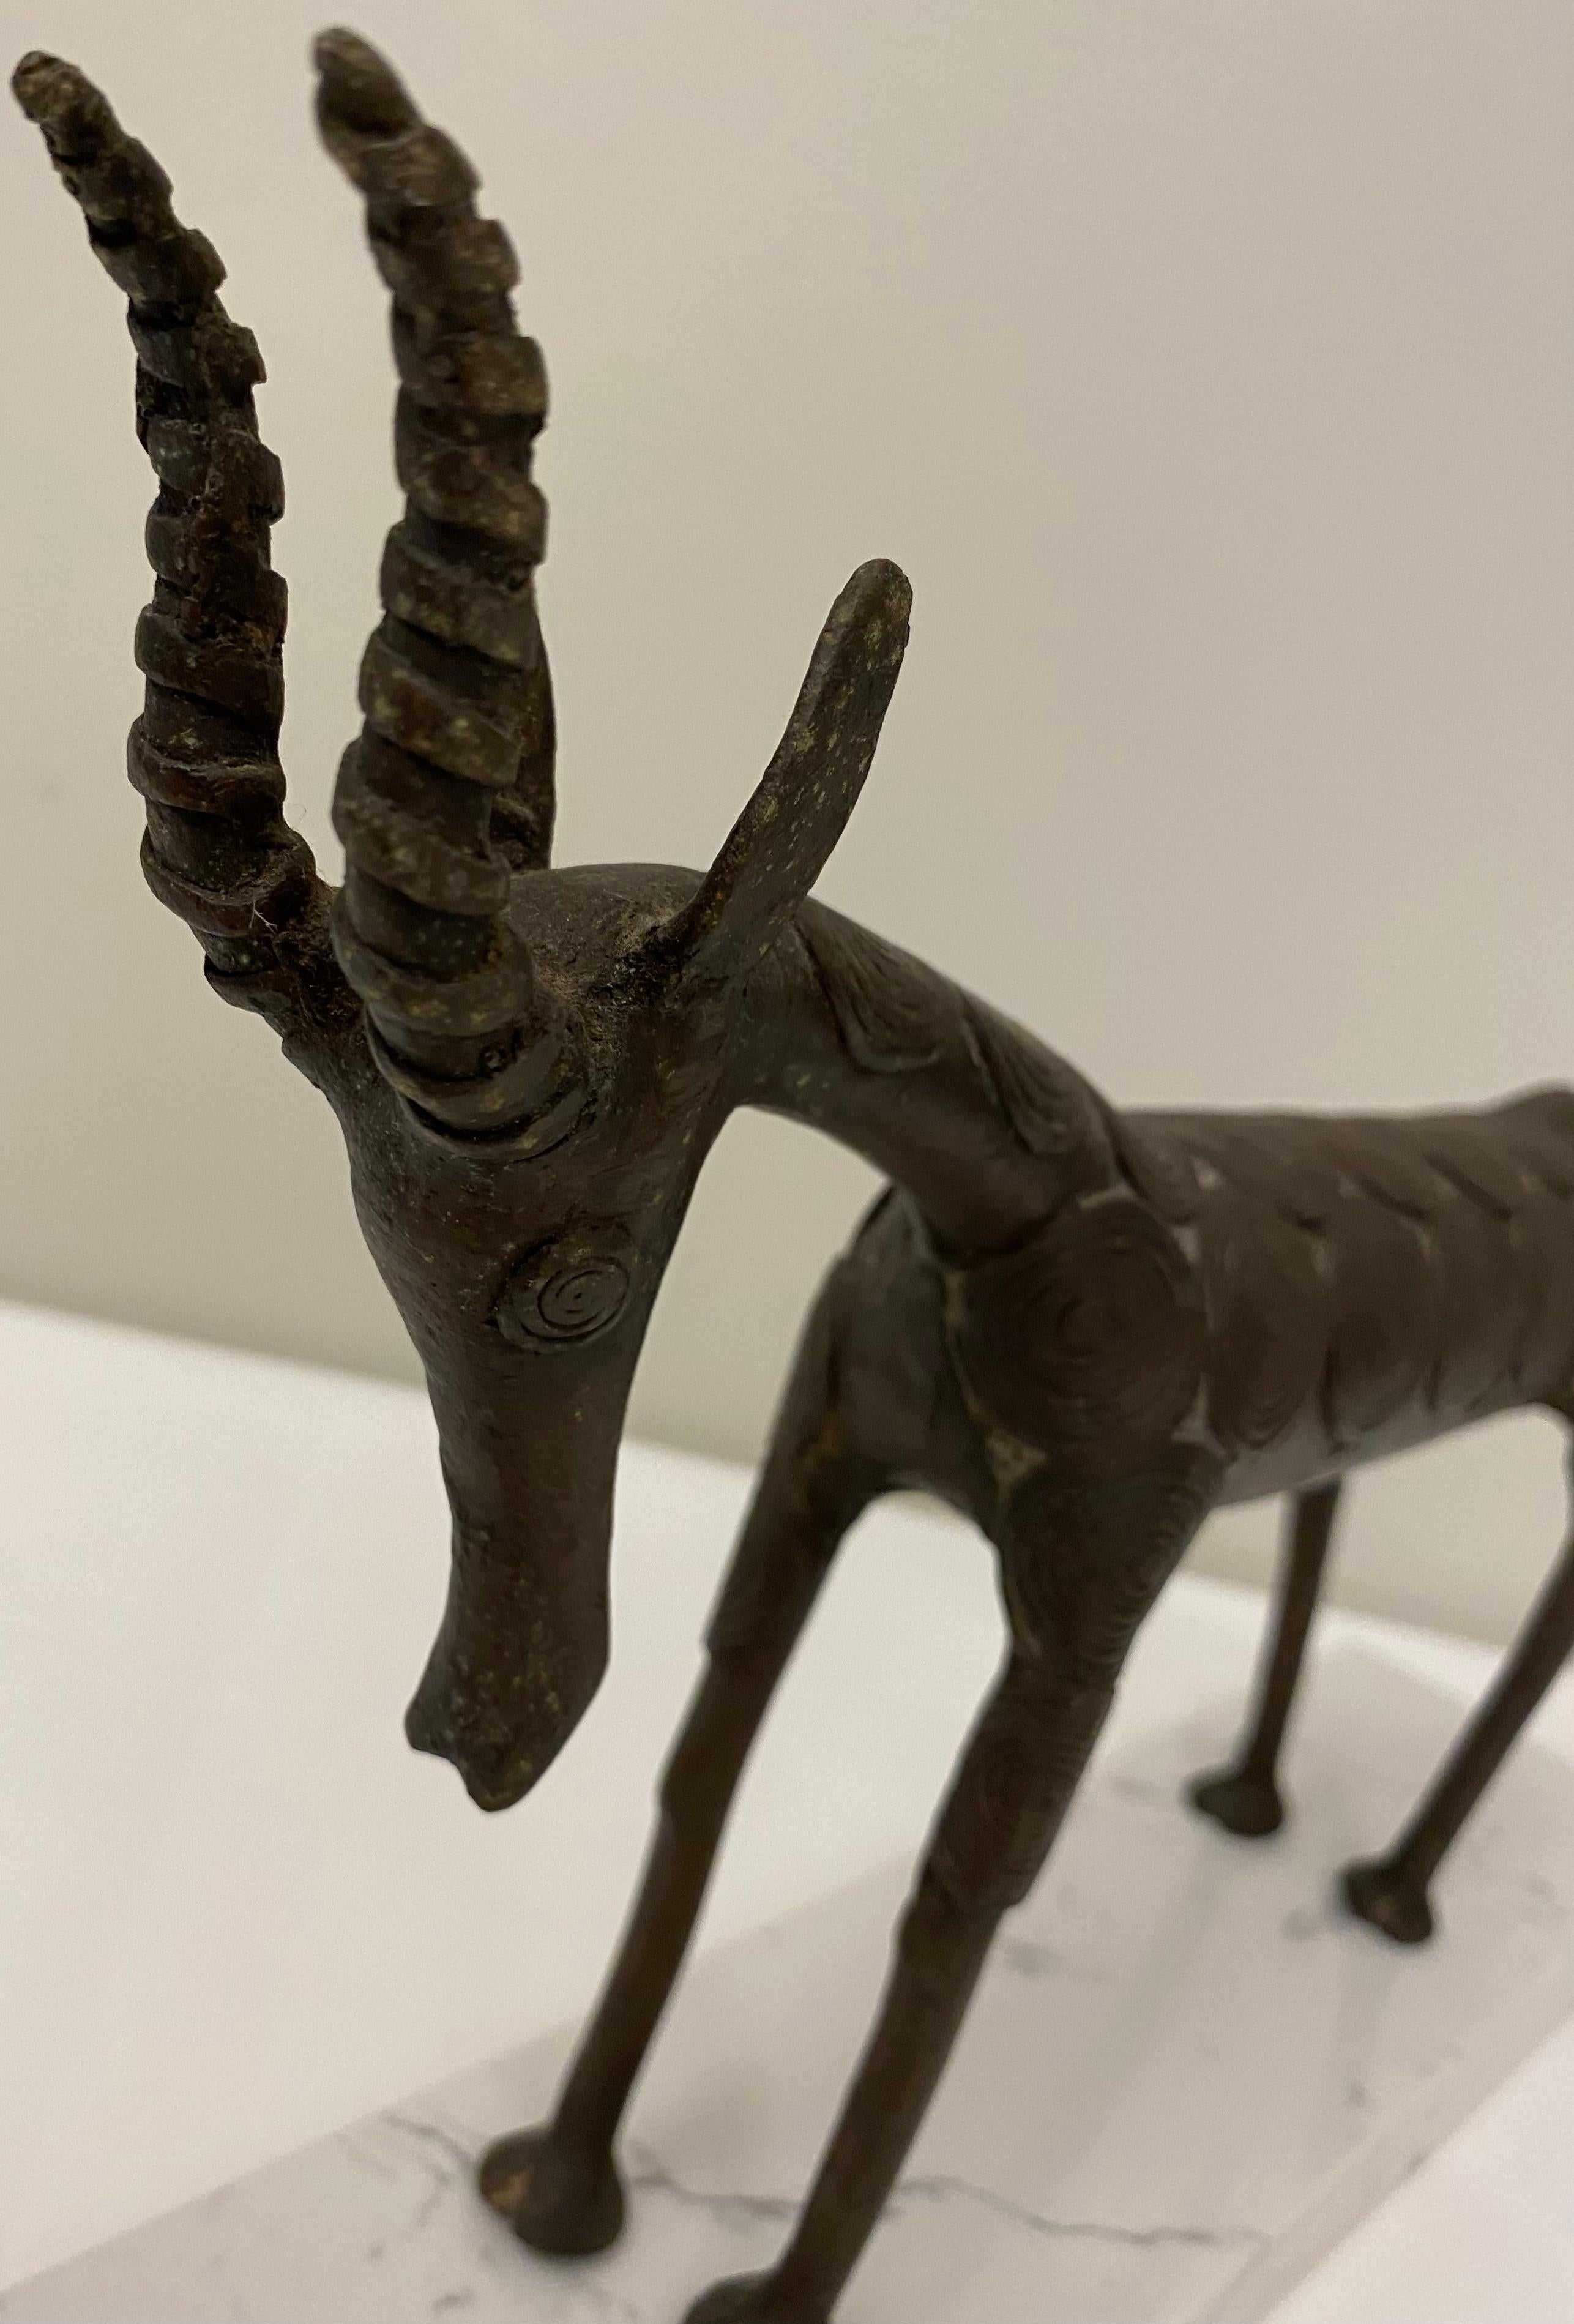 Intricately hand-crafted African antelope, Benin tribal sculpture.
Details in hand-hammered bronze on wood small pieces attached with small nails and numerous carvings. 

This object form is one of the best-known examples of Benin art, created